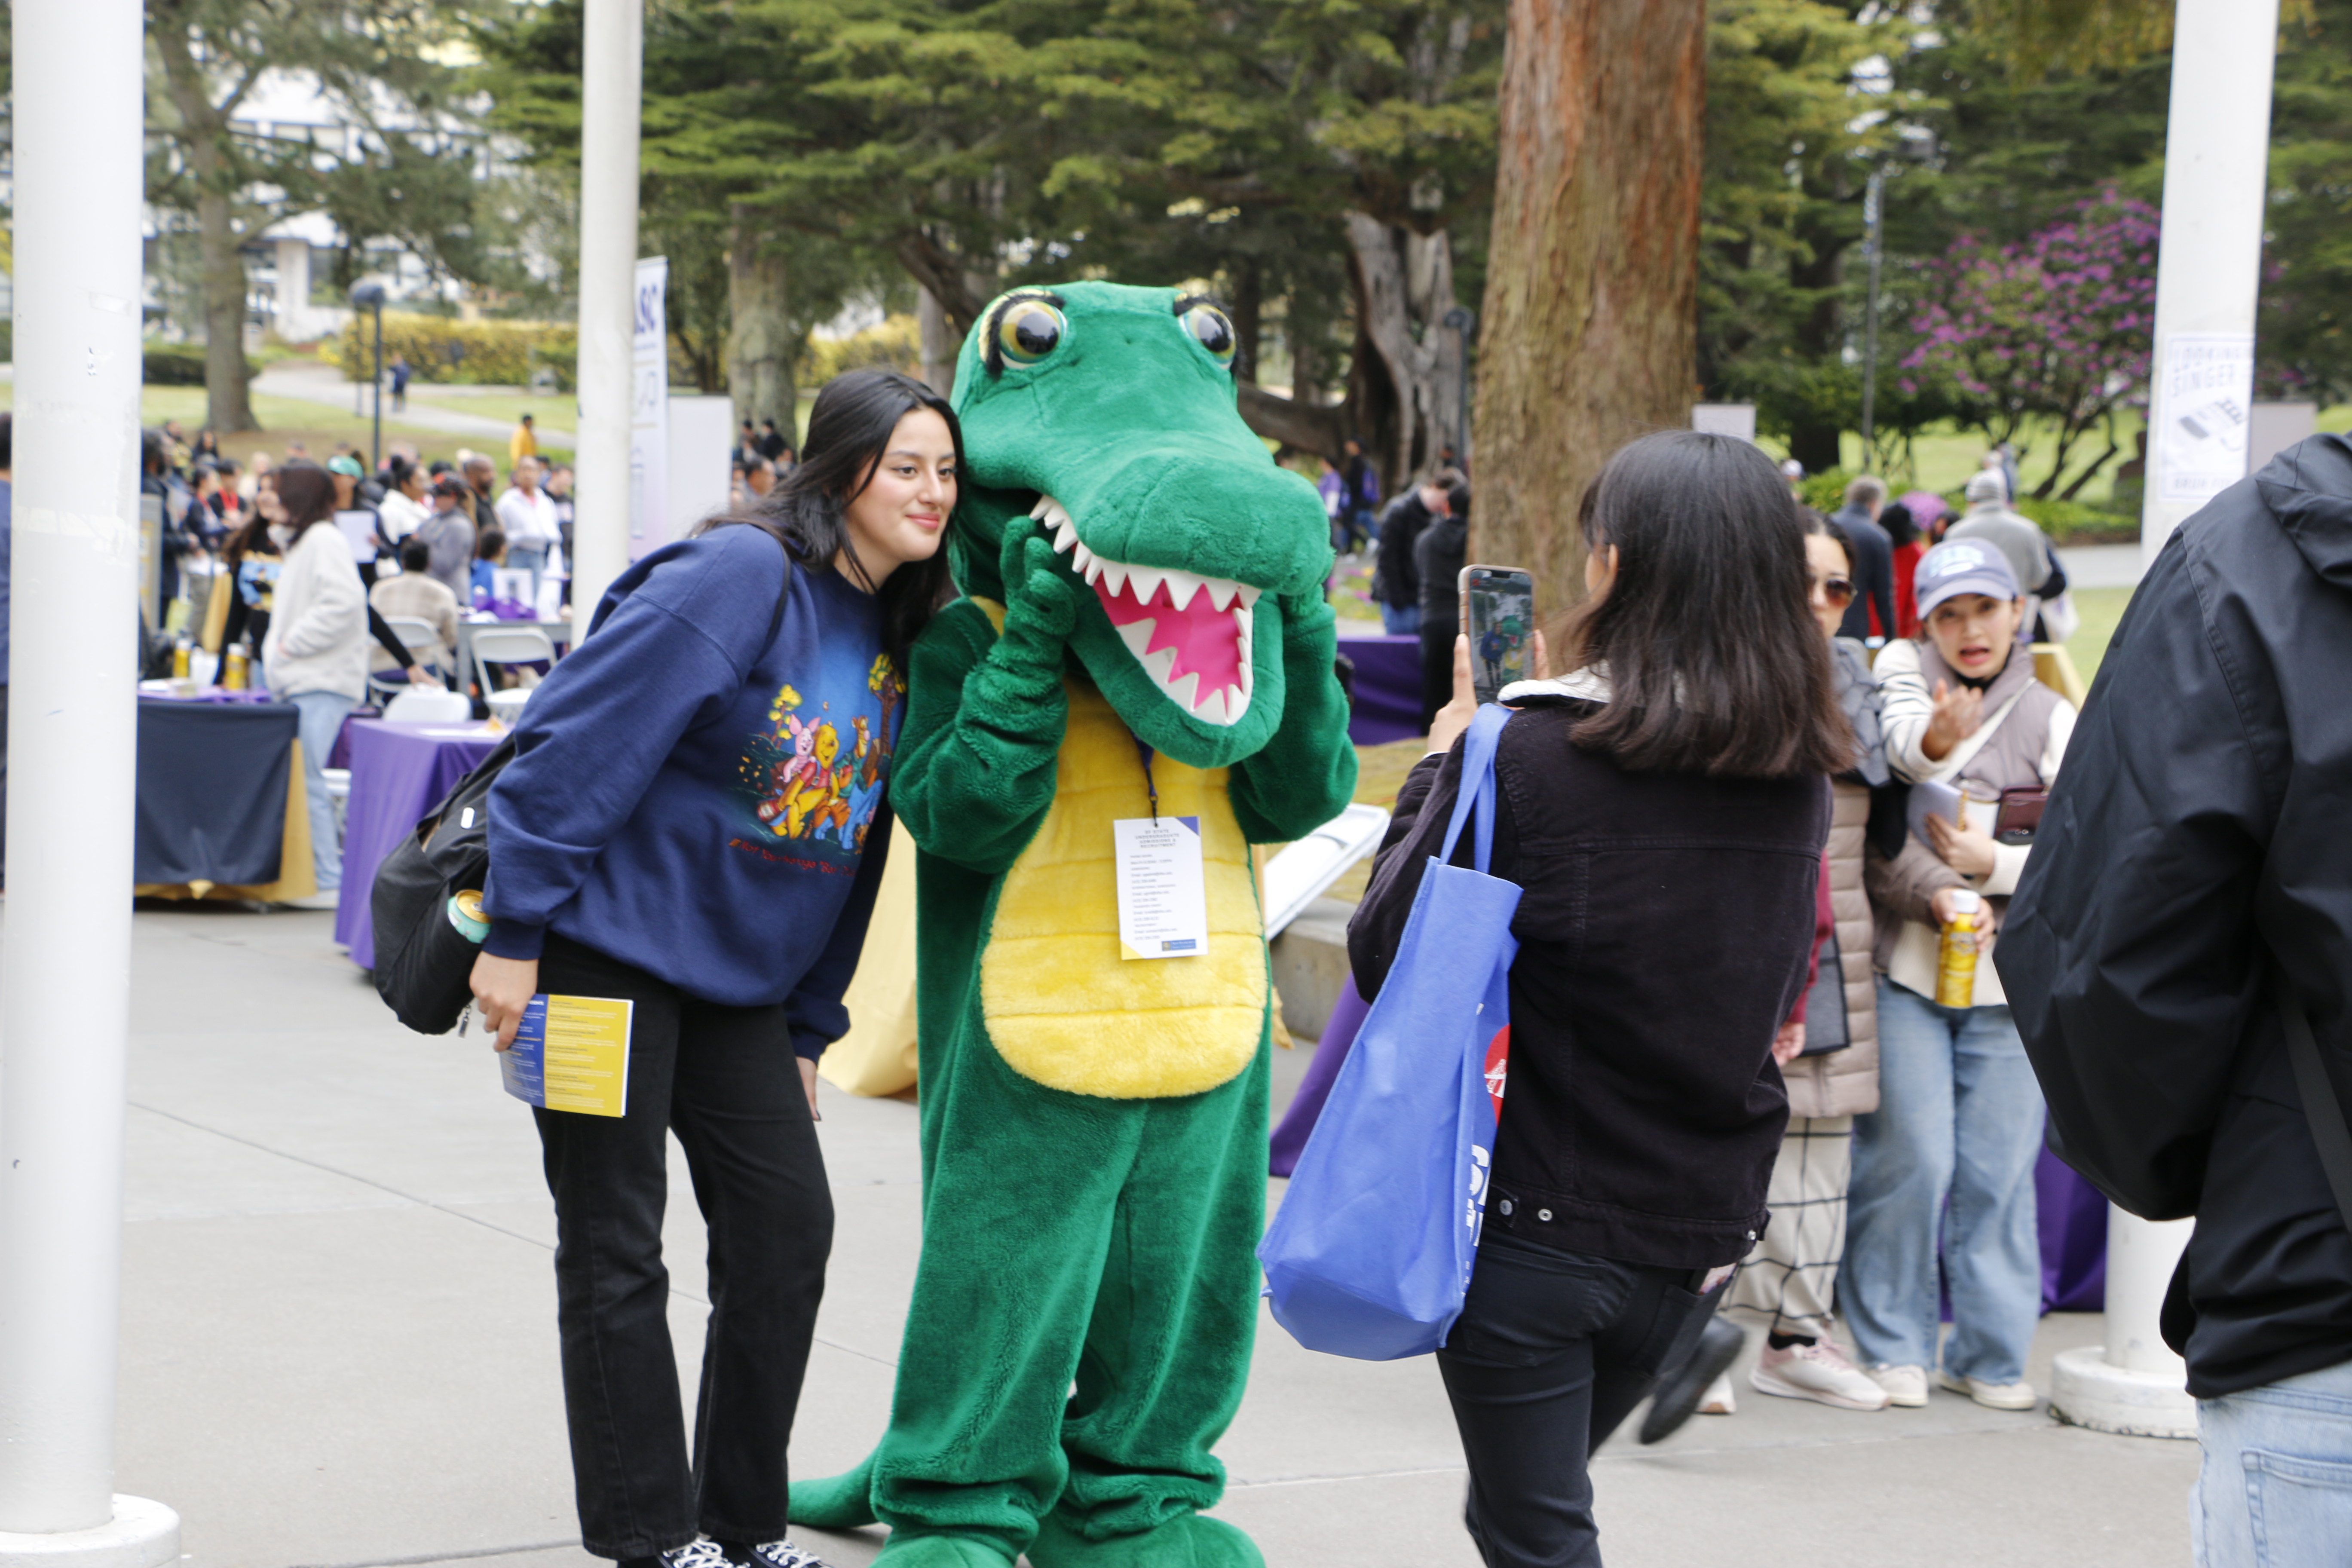 Ali Gator poses for a photo with an attendee at Explore SF State.